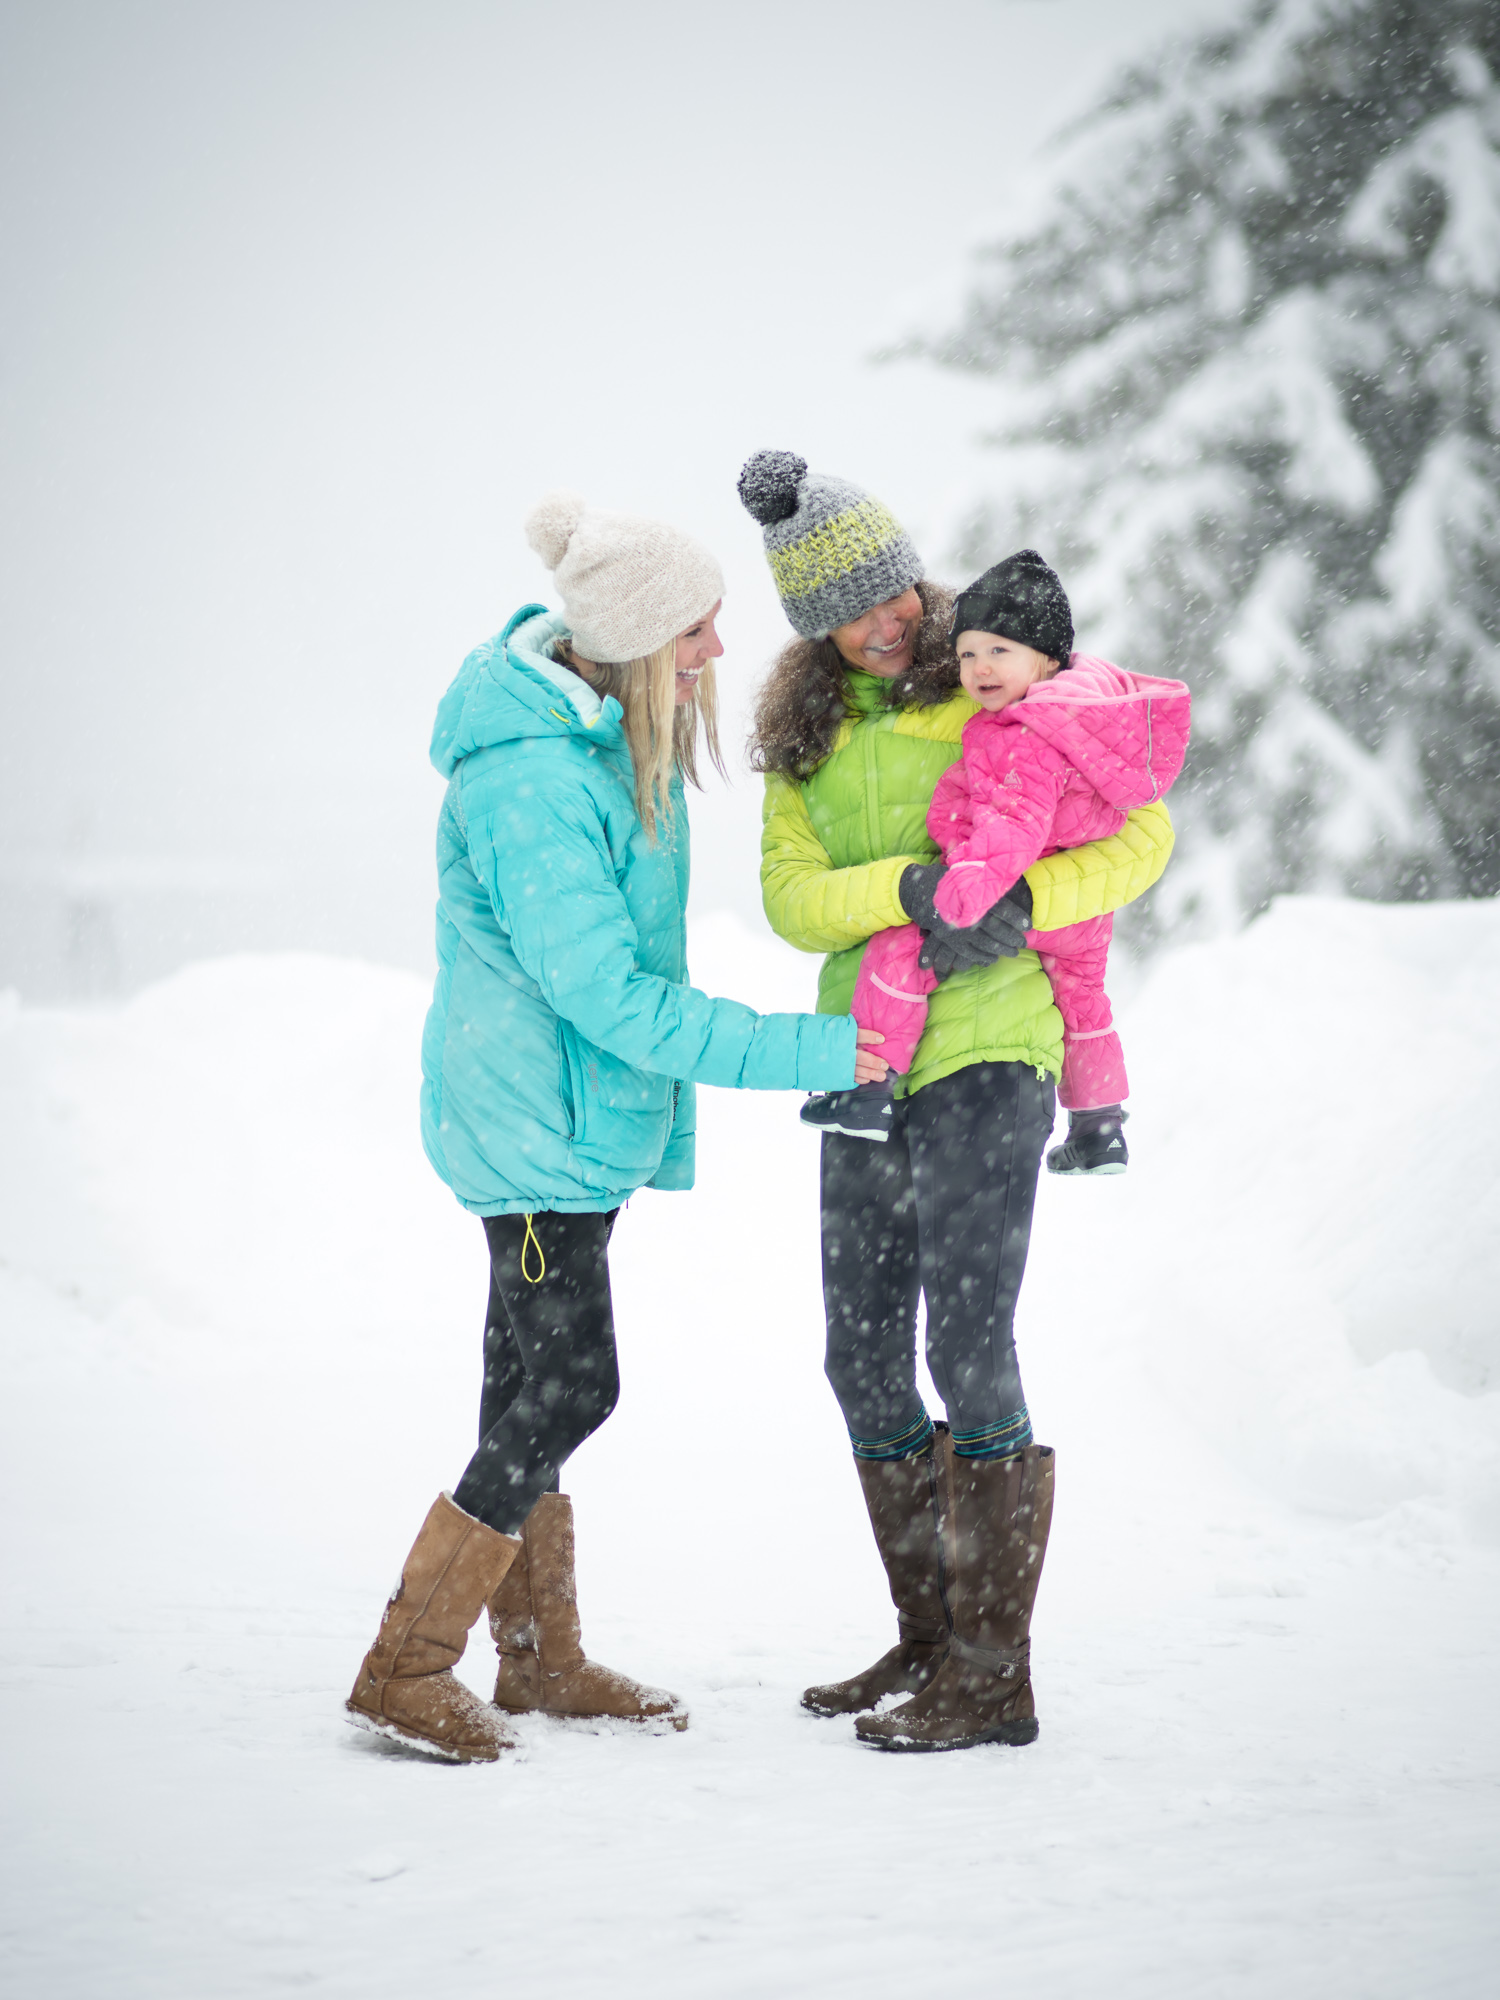 Family time in the snow. McCall, Idaho.